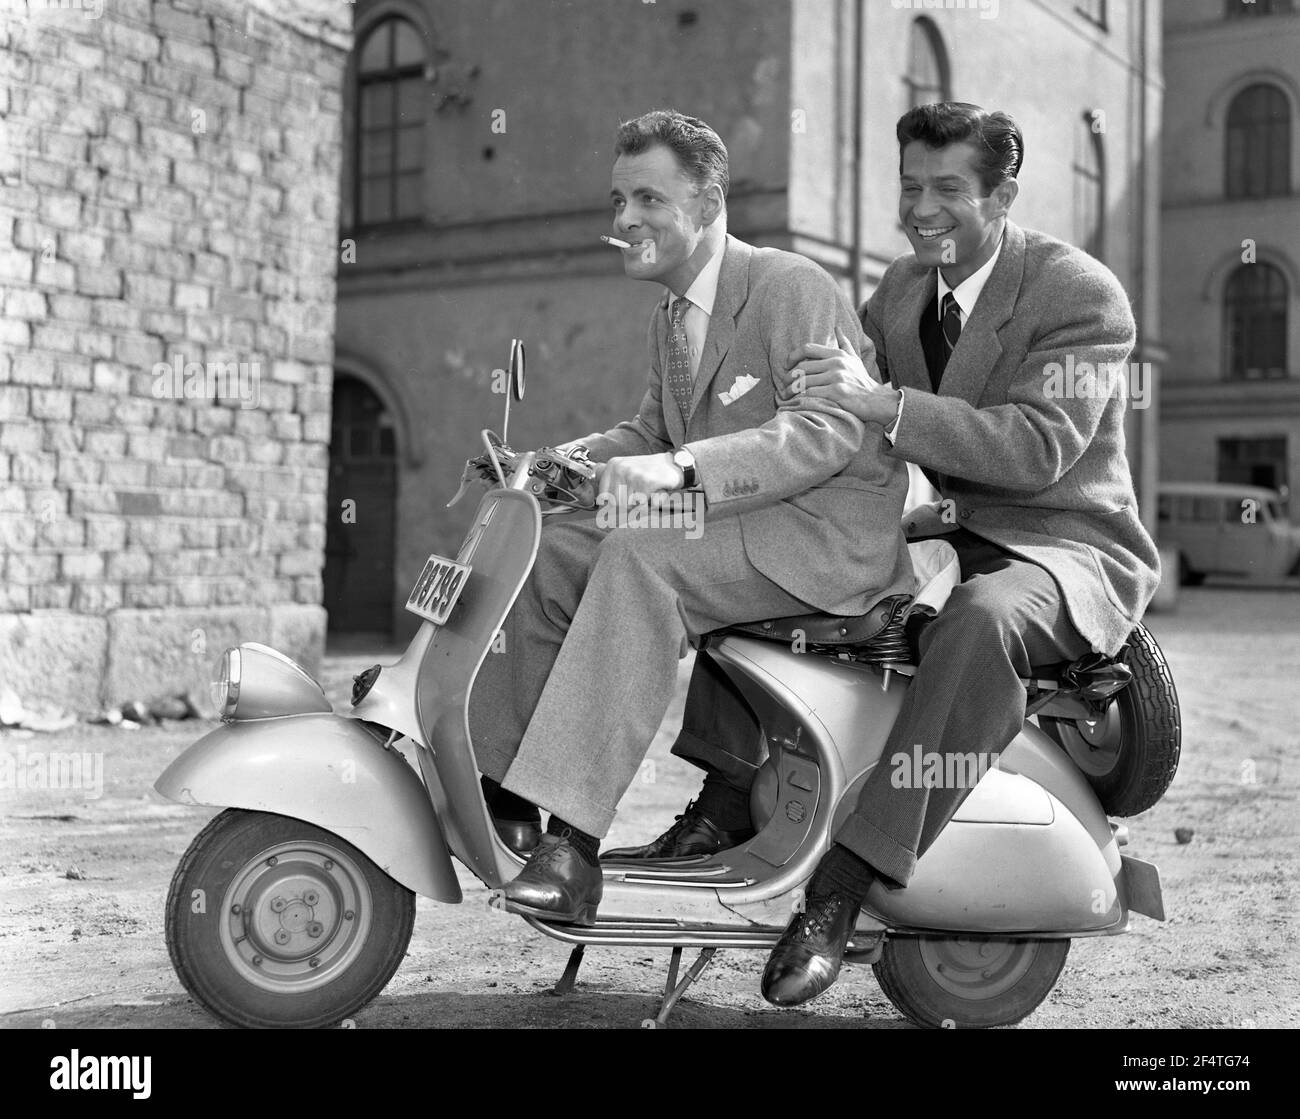 Vespa. An italian brand of scooter manufactured by Piaggio. On 23 April 1946, Piaggio & C. S.p.A. filed a patent for “a motor cycle with a rational complex of organs and elements with body combined with the mudguards and bonnet covering all the mechanical parts”. Shortly thereafter, the Vespa made its first public appearance. Driving is actor Sven Lindberg in the 1950s. ref 39K-8 Stock Photo